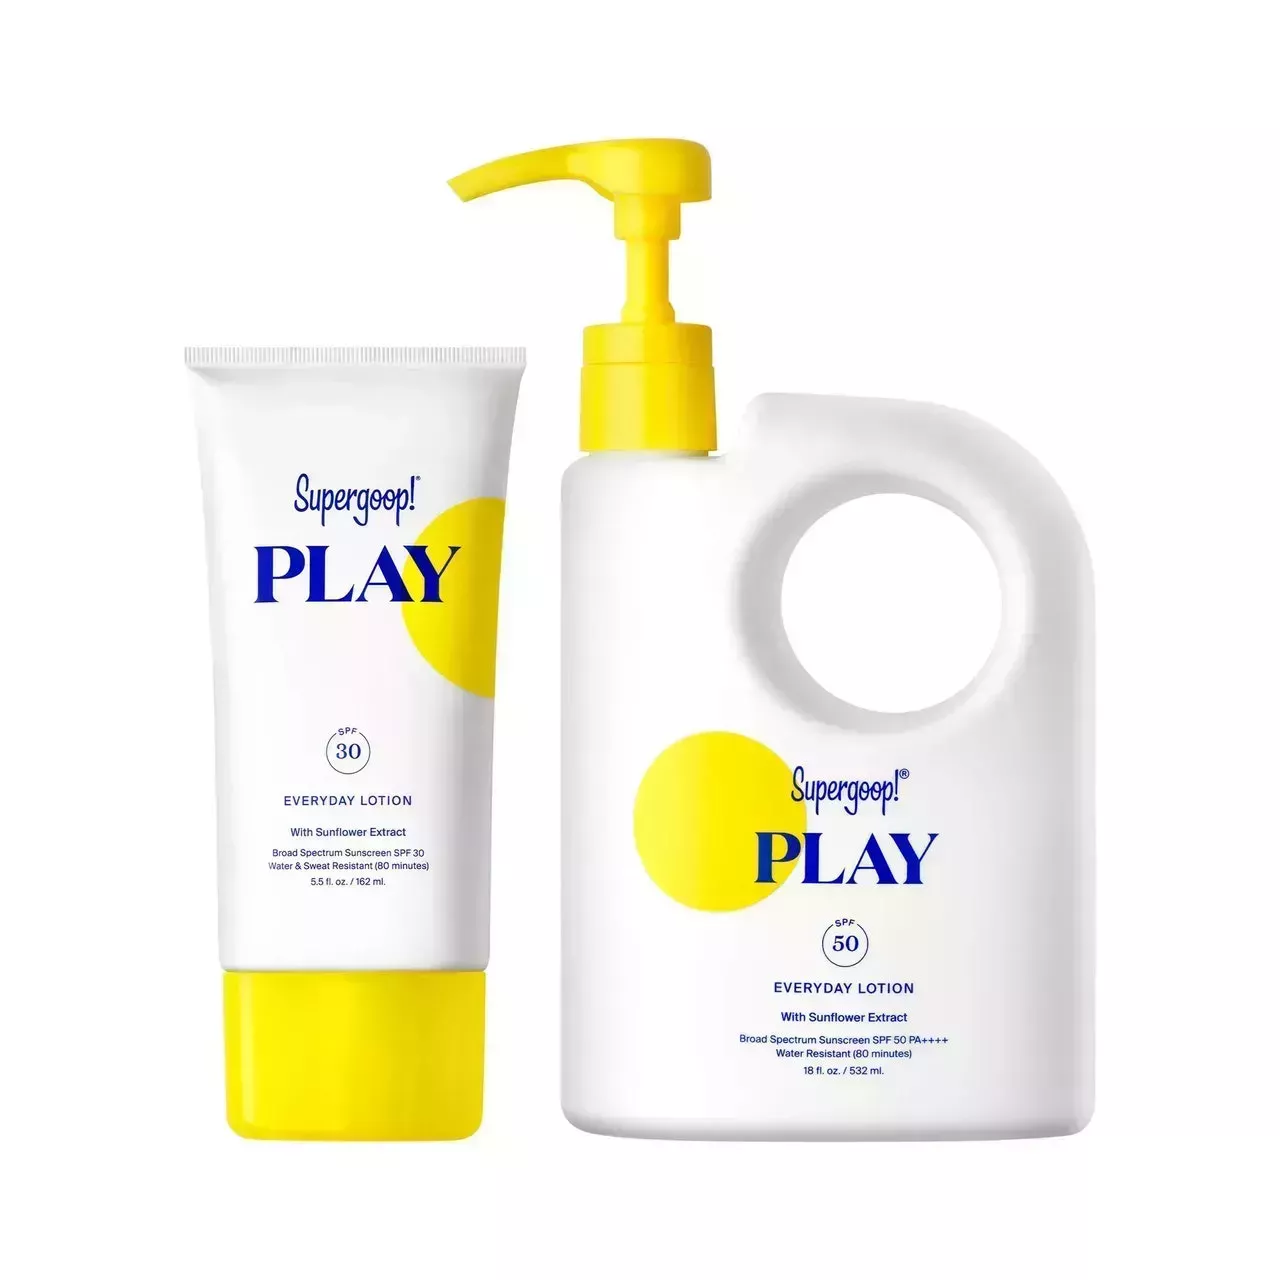 Supergoop Play Sunscreen Set white tube with yellow cap and white jug with yellow pump dispenser on white background